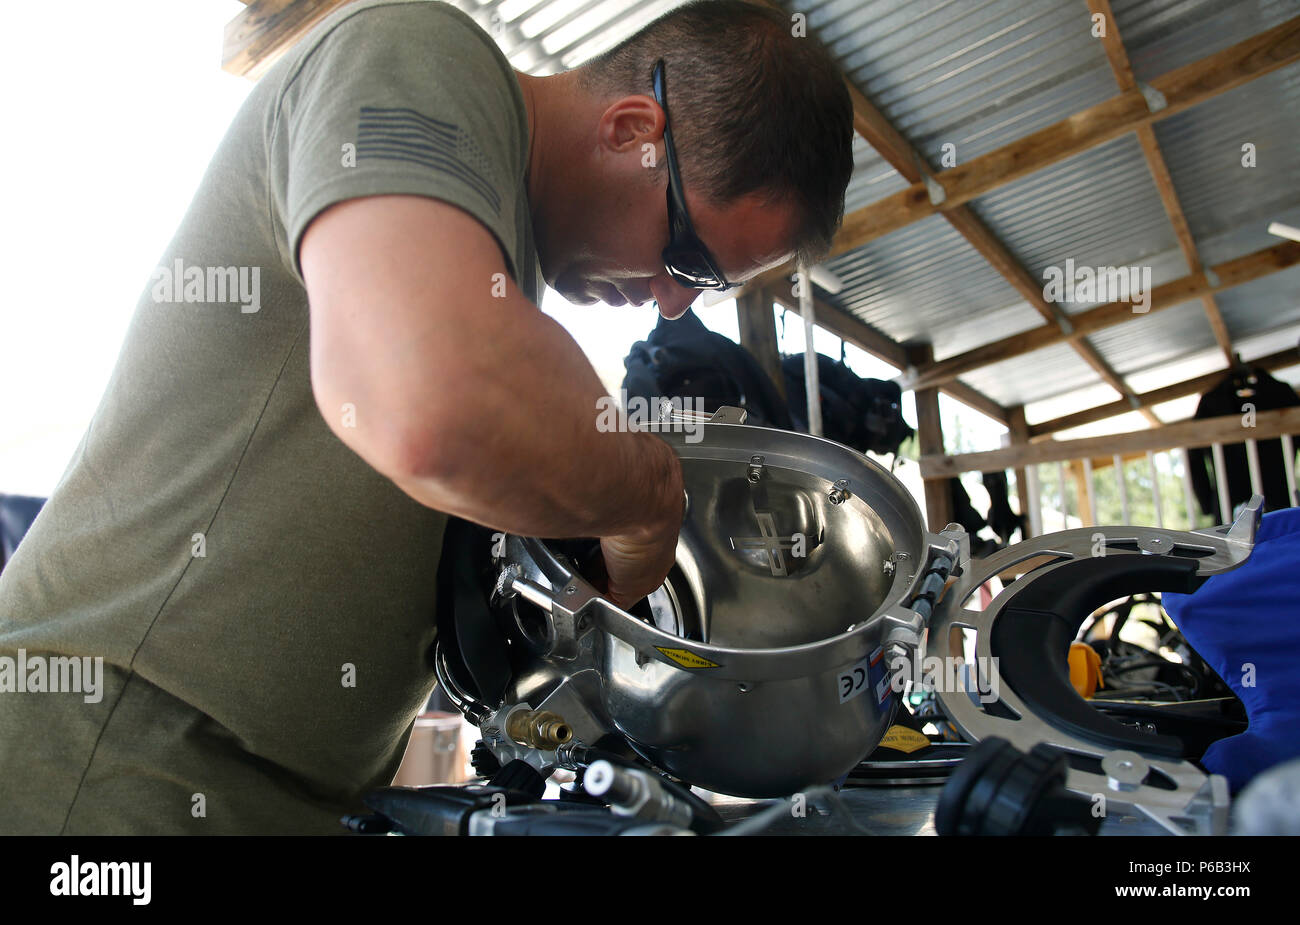 U.S. Border Patrol BORSTAR diver Juan Verdura inspects a Kirby Morgan diving helmet as he and his fellow divers stow away dive equipment after completing two weeks of advanced div training in Panama City, Fla., May 27, 2016. CBP Photo by Glenn Fawcett Stock Photo